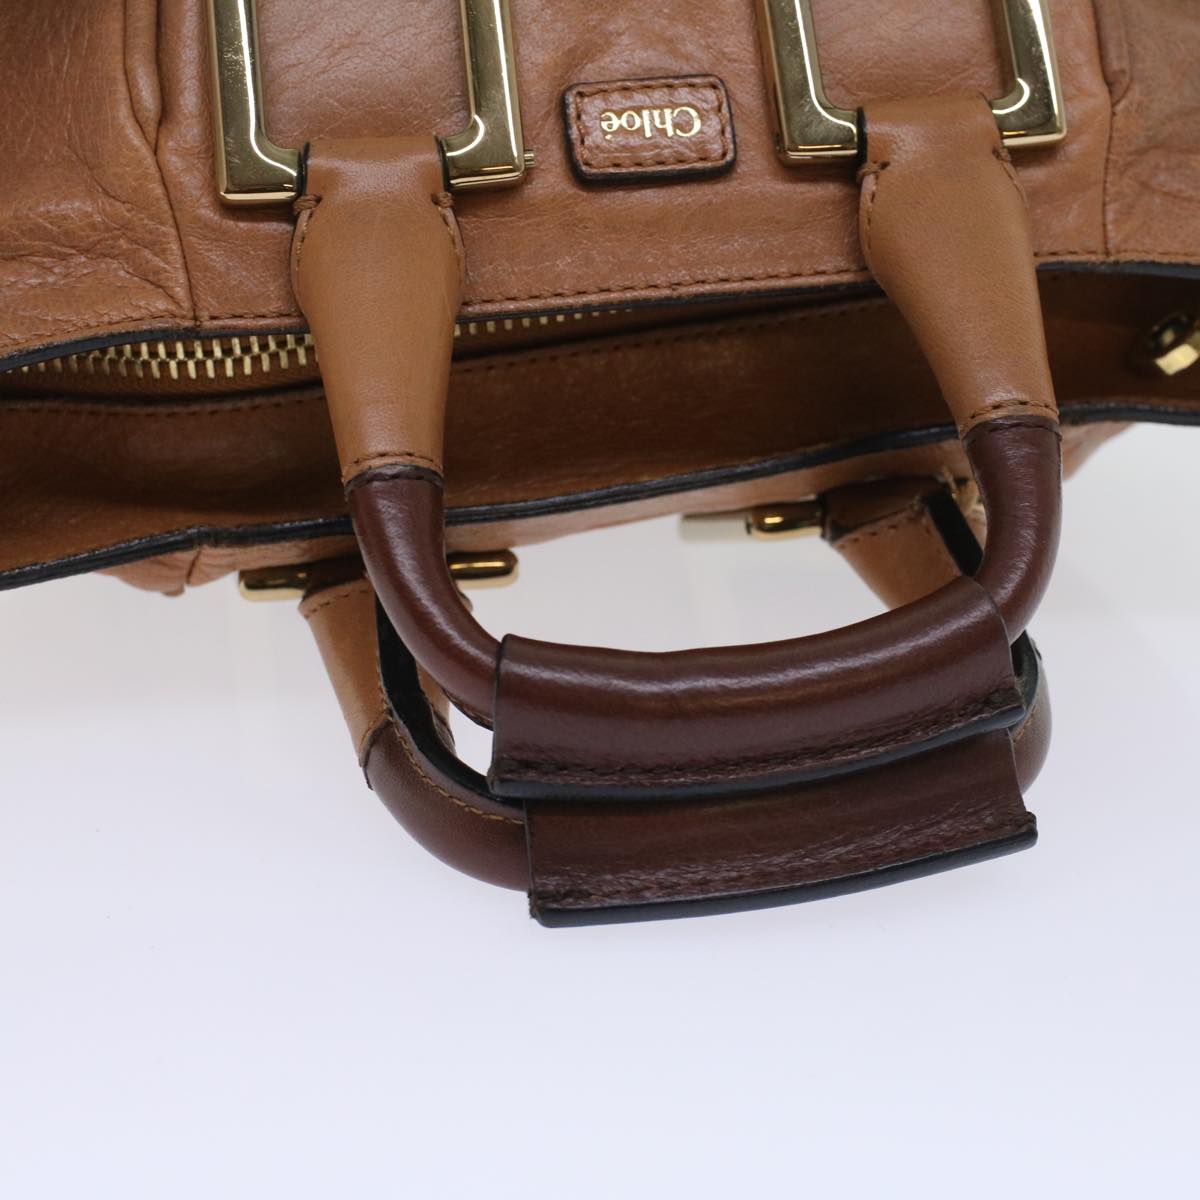 Chloe Etel Hand Bag Leather 2way Brown 03-12-50-65 Auth th4017